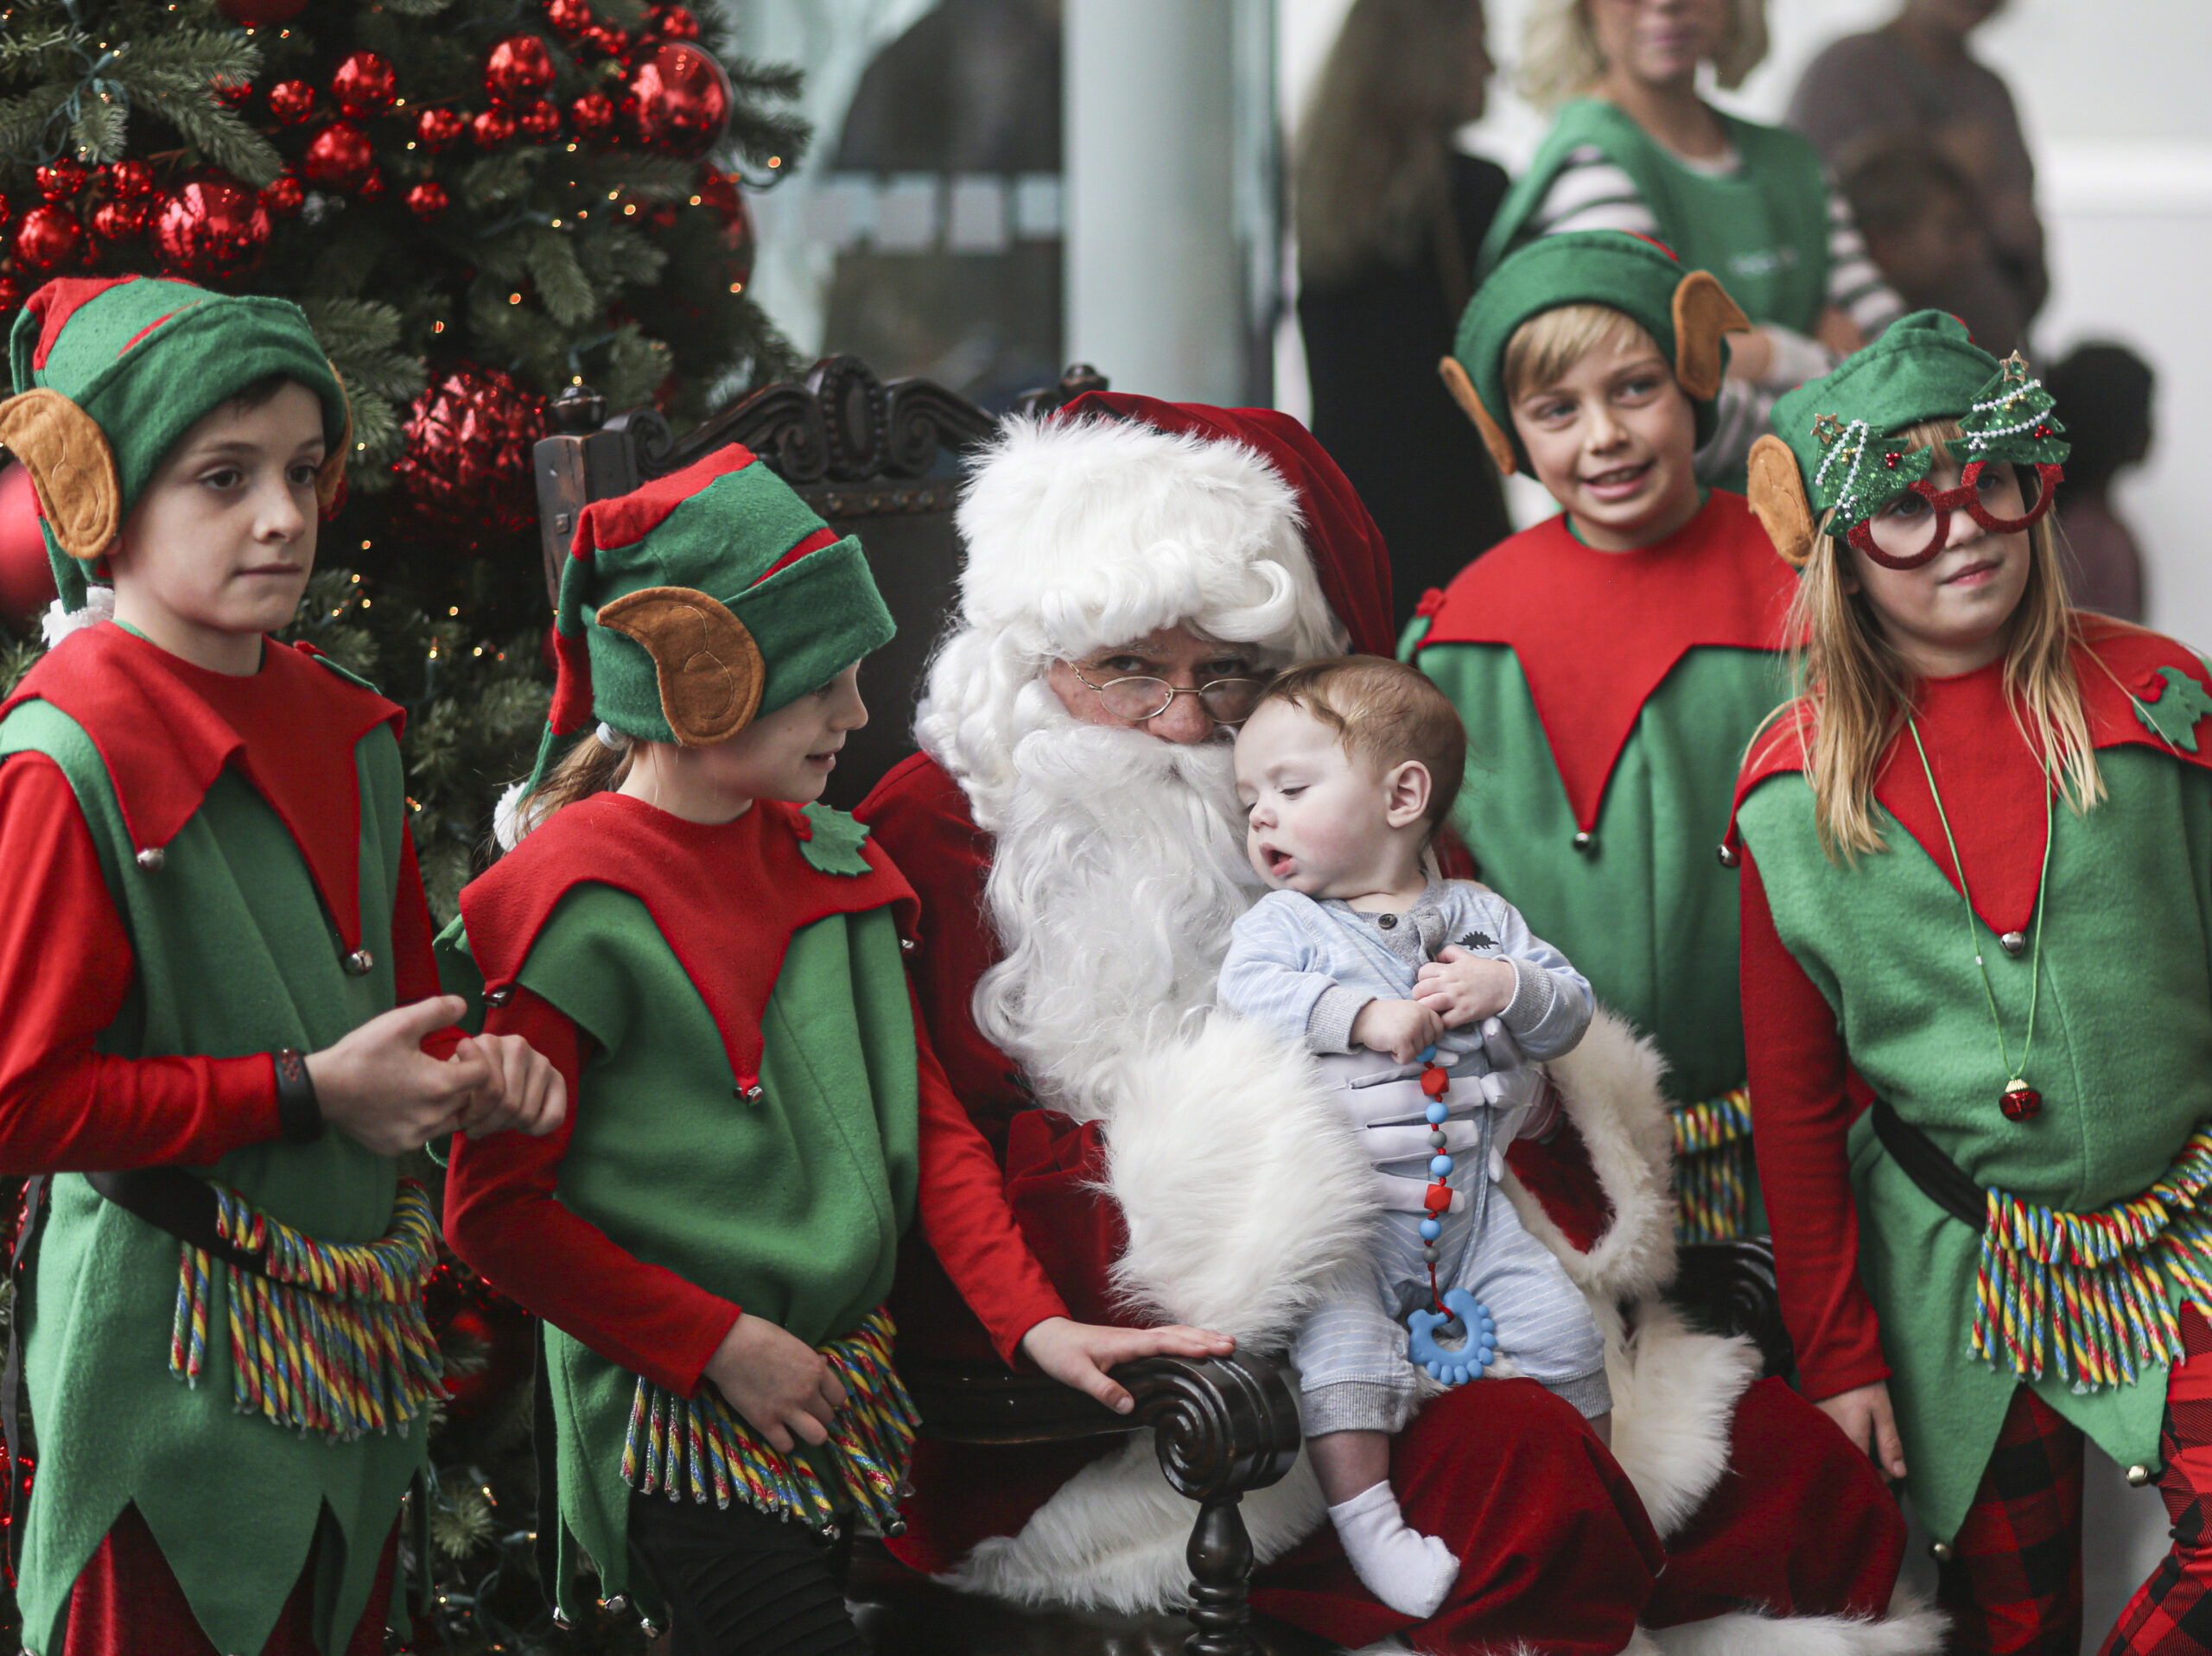 Santa Claus, seated in front of a Christmas tree, holding a baby, with children in elf costumes of red and green standing around.